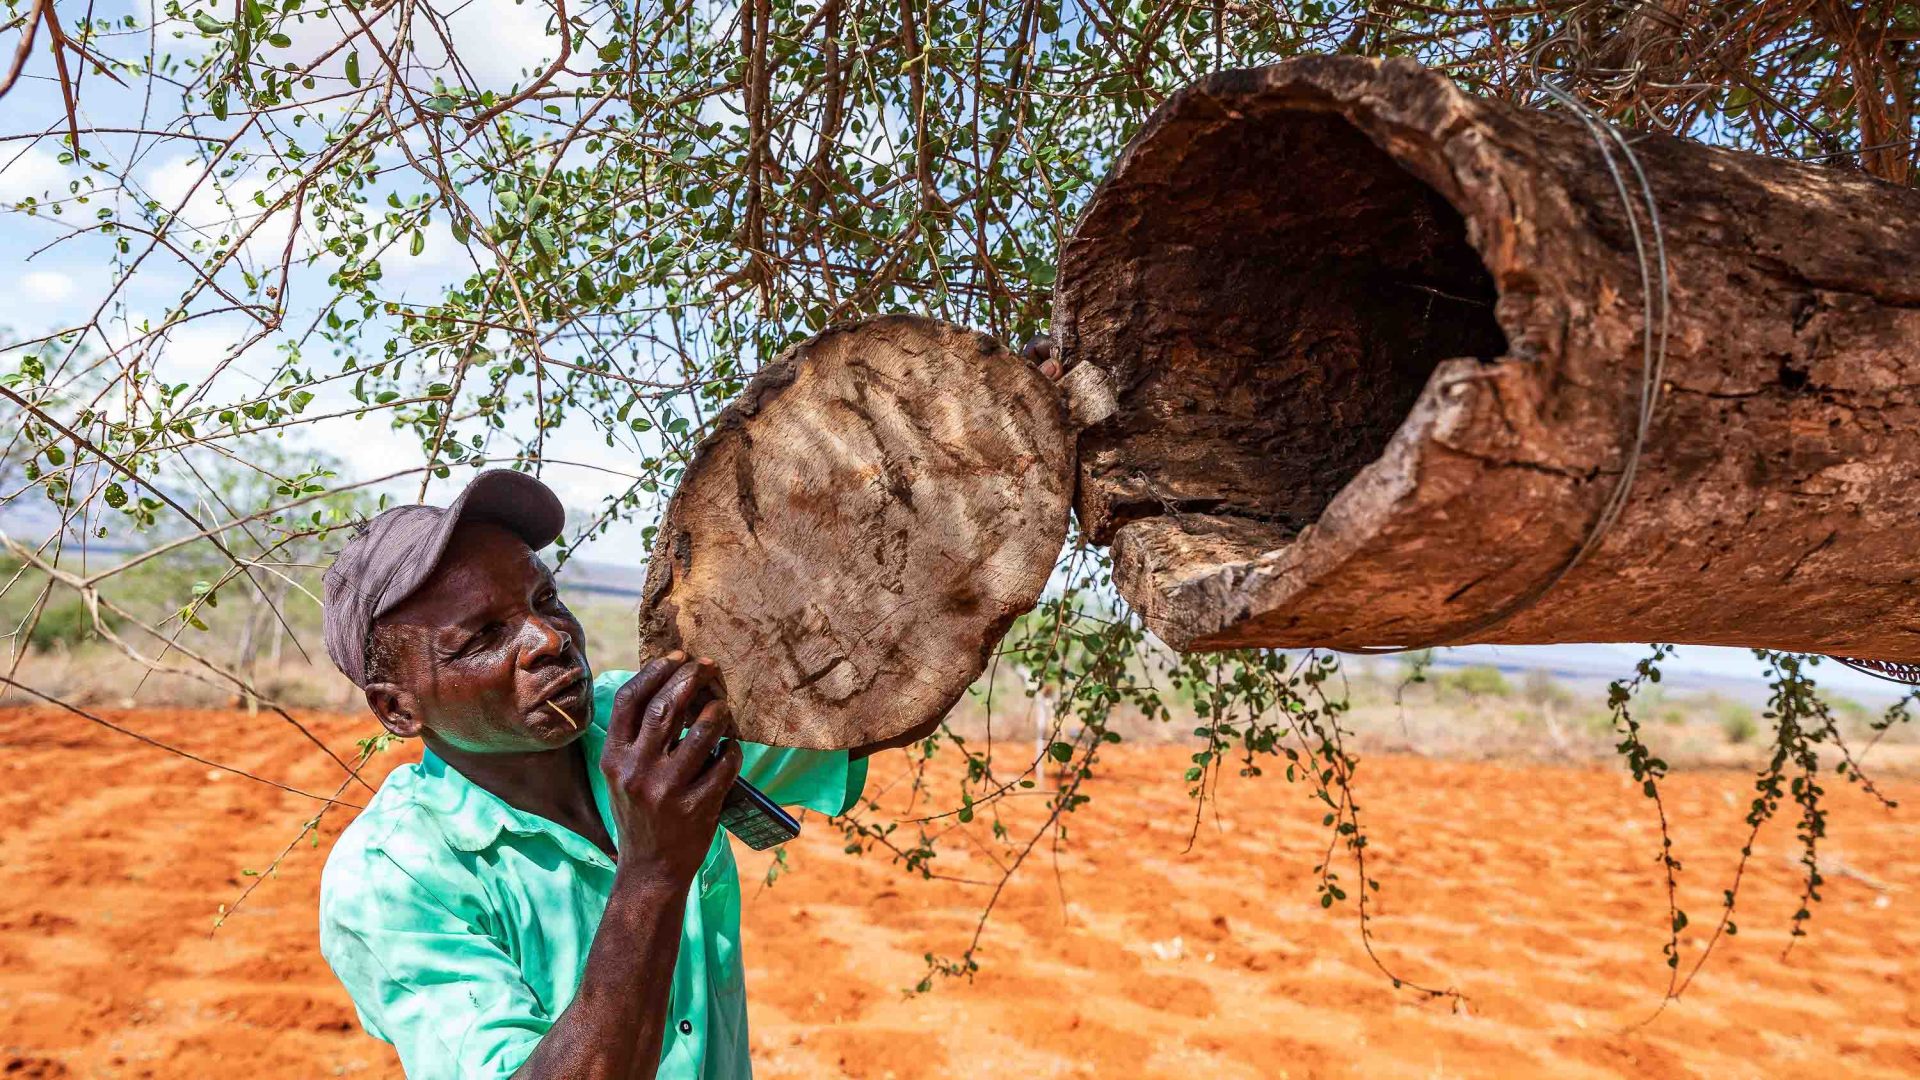 How bees became a former poacher’s saving grace in Kenya